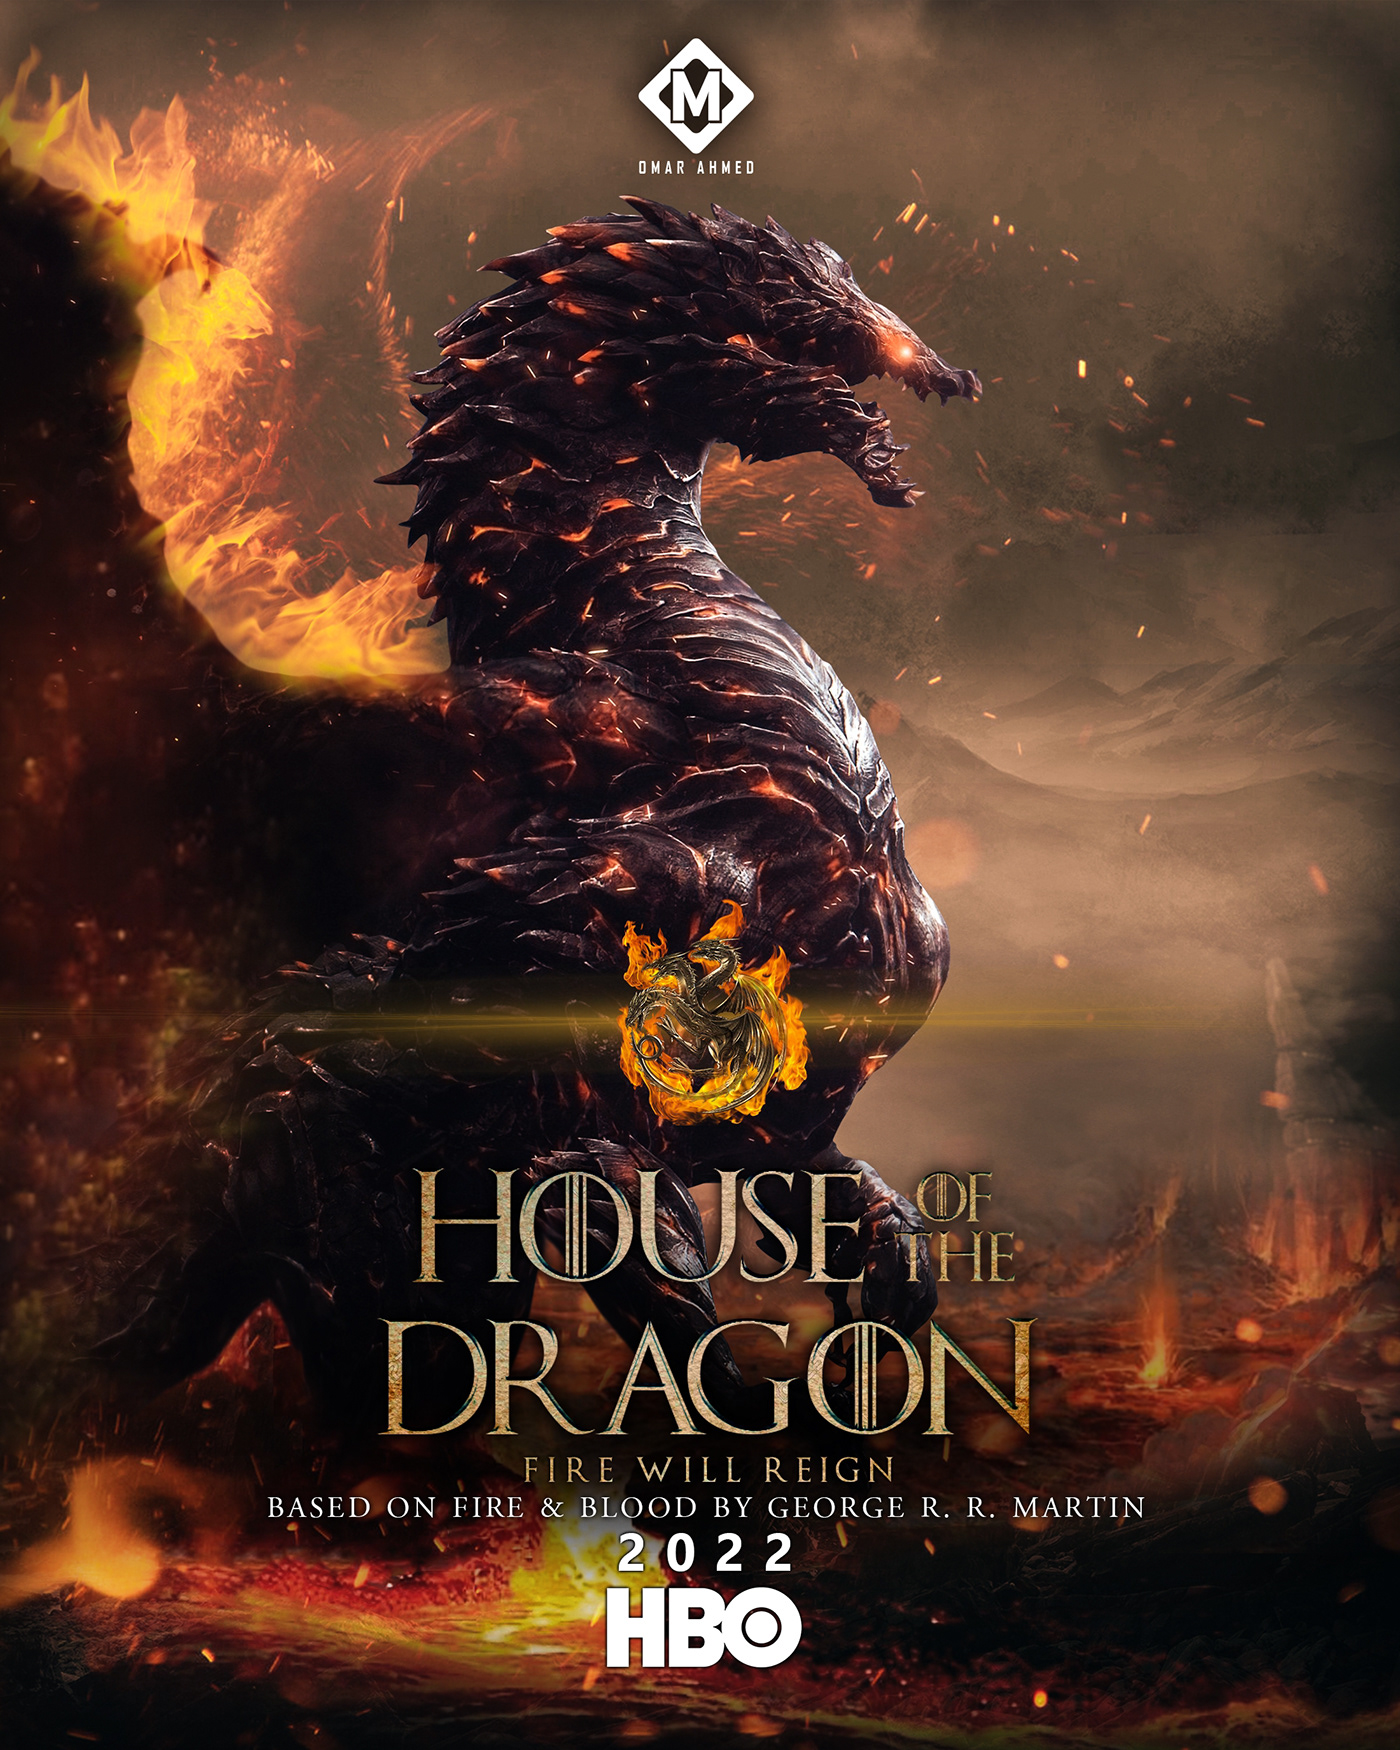 poster design dragon fire House of the Dragon Game of Thrones hbo HBO max photoshop illusion